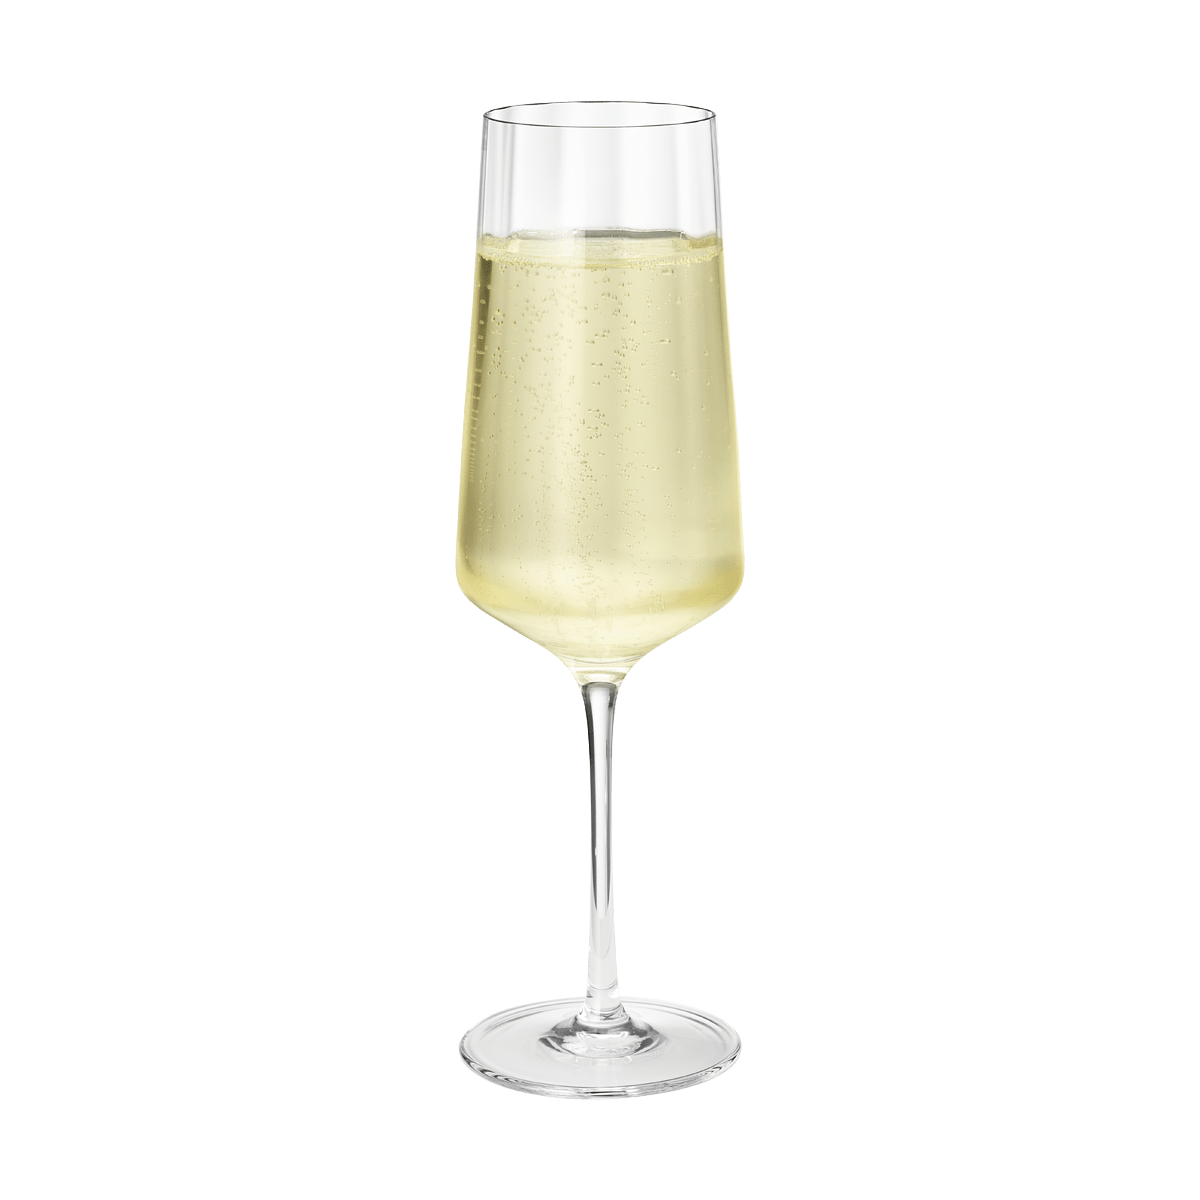 https://res.cloudinary.com/georgjensen/image/upload/f_auto,dpr_2/w_auto,c_scale/products/images/hi-res/10019698_BERNADOTTE_CHAMPAGNE_FLUTE_GLASS_CRYSTALLINE_27CL_6PCS_02?_i=AG